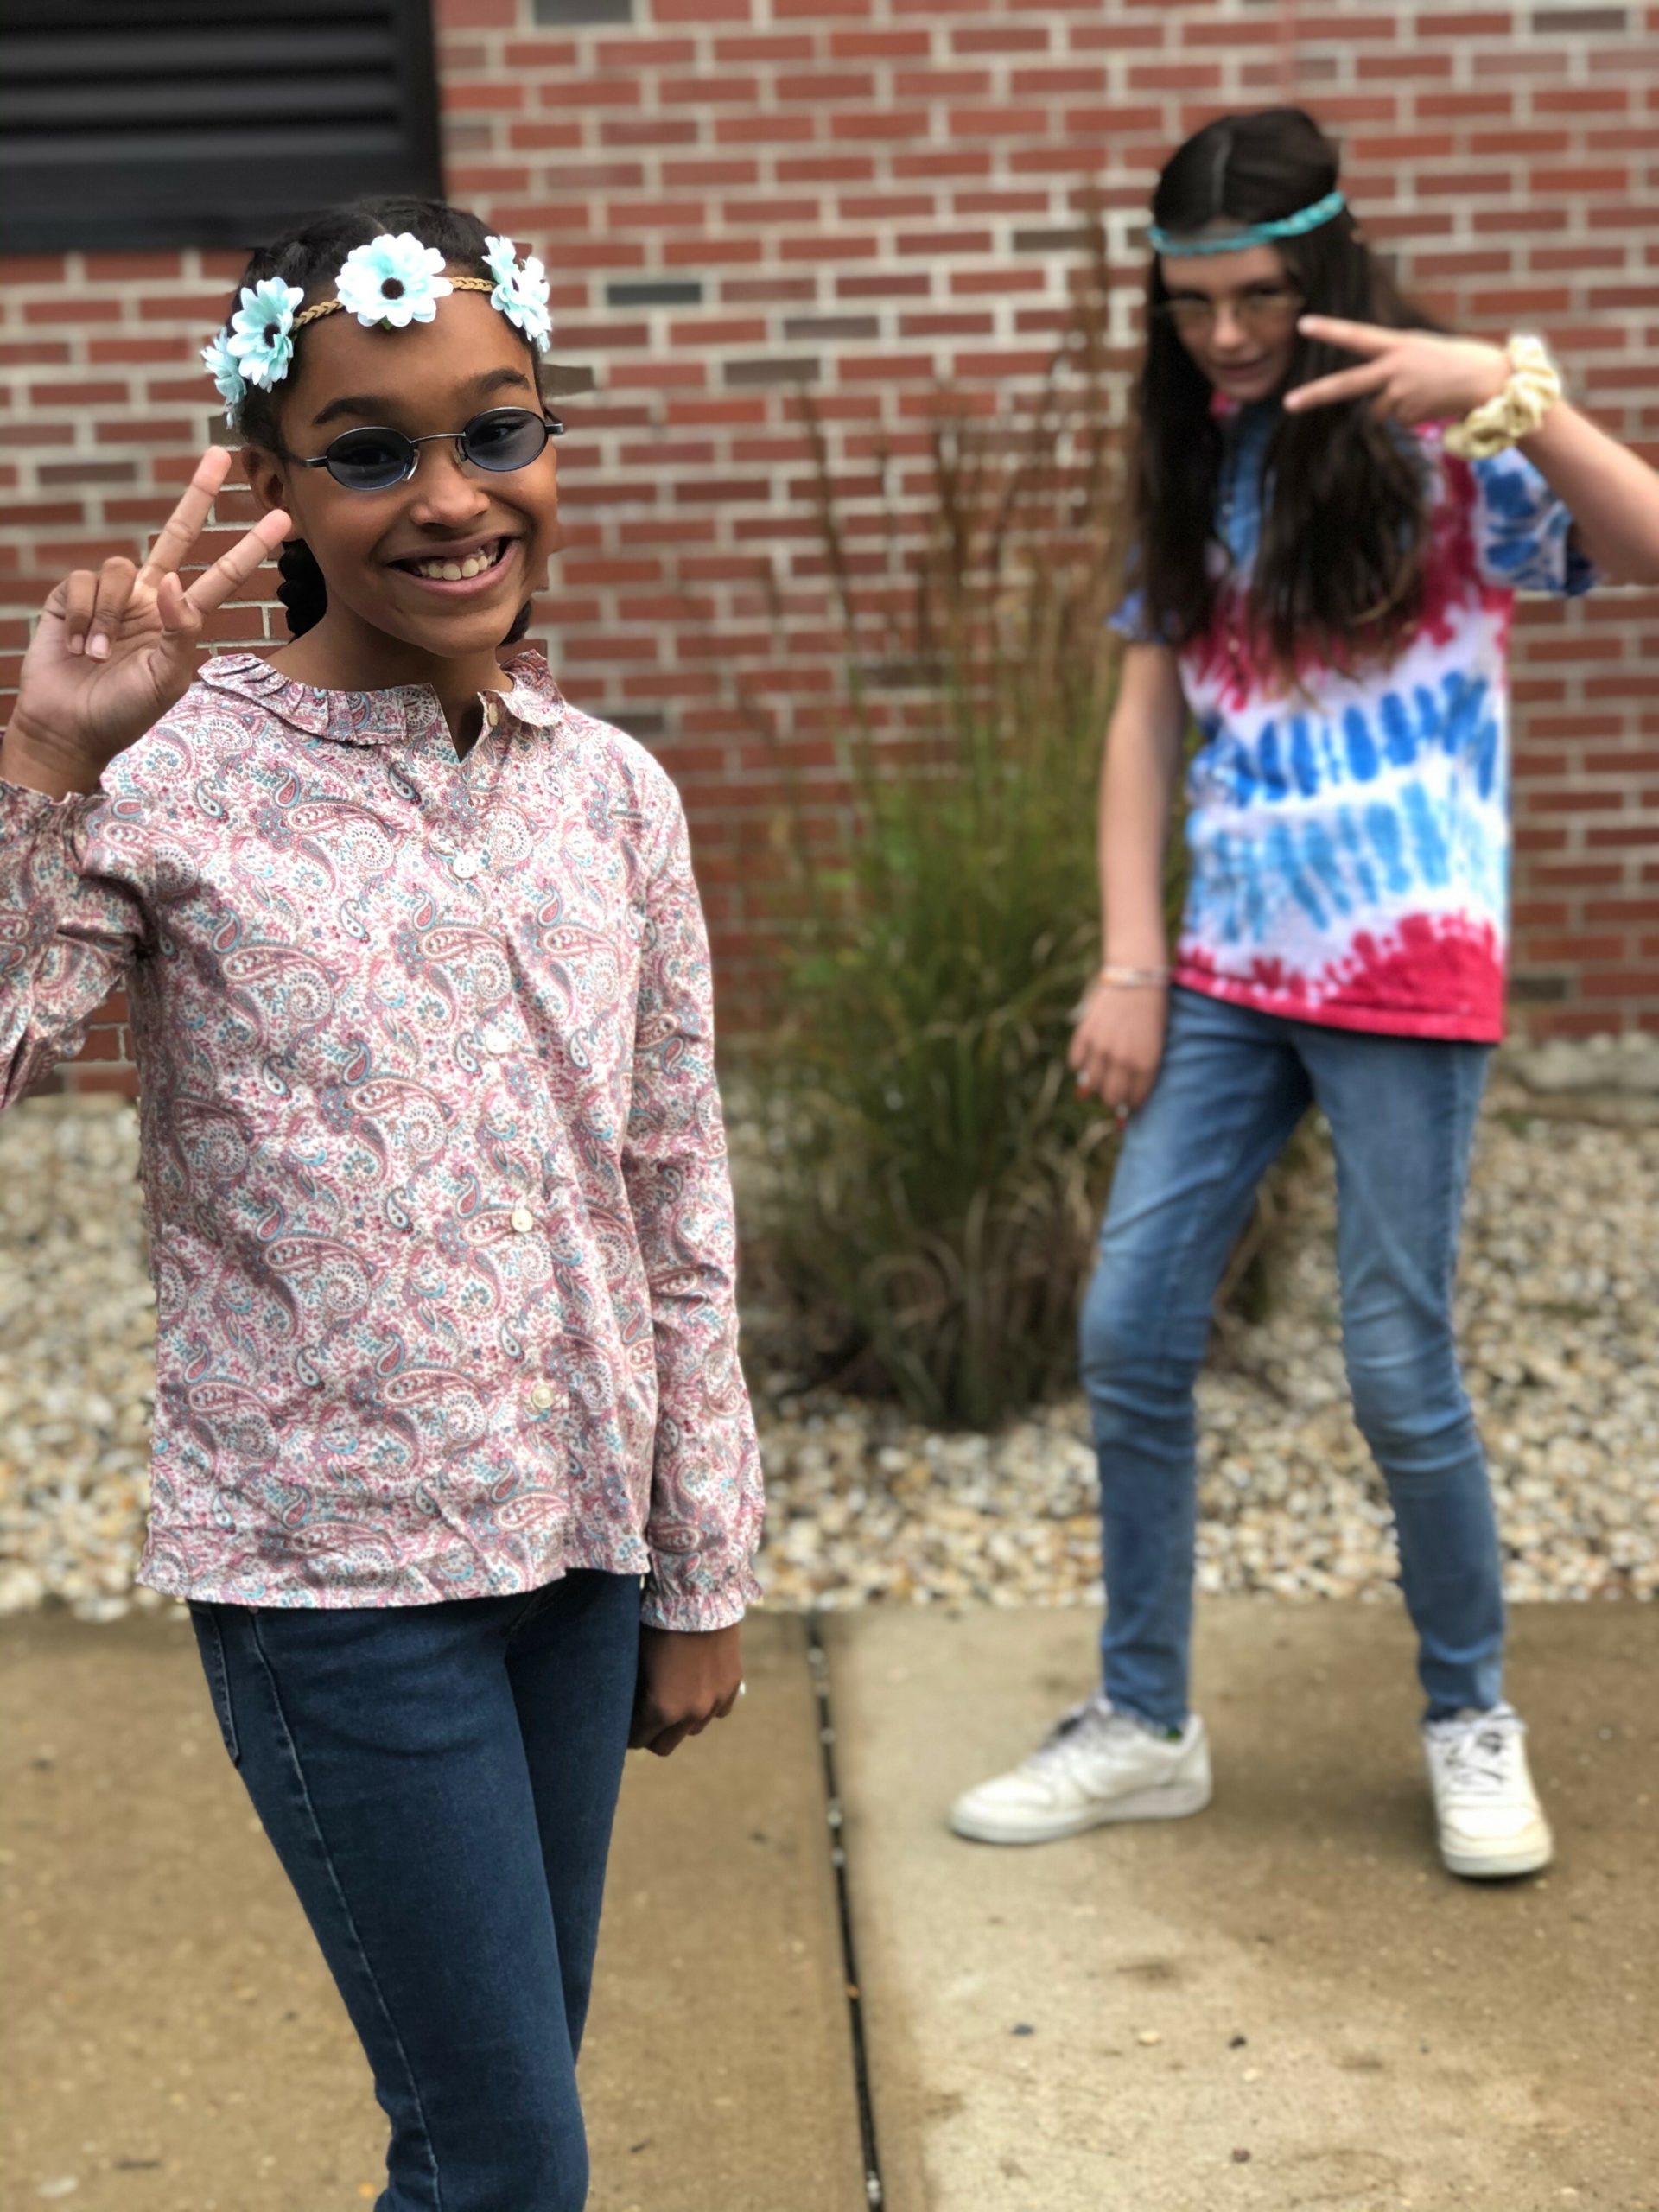 Sixth graders Paige Francis and Wiley Reuss dressed in outfits from their favorite decade on “Throwback Tuesday,” during Red Ribbon Week at Pierson Middle School.  